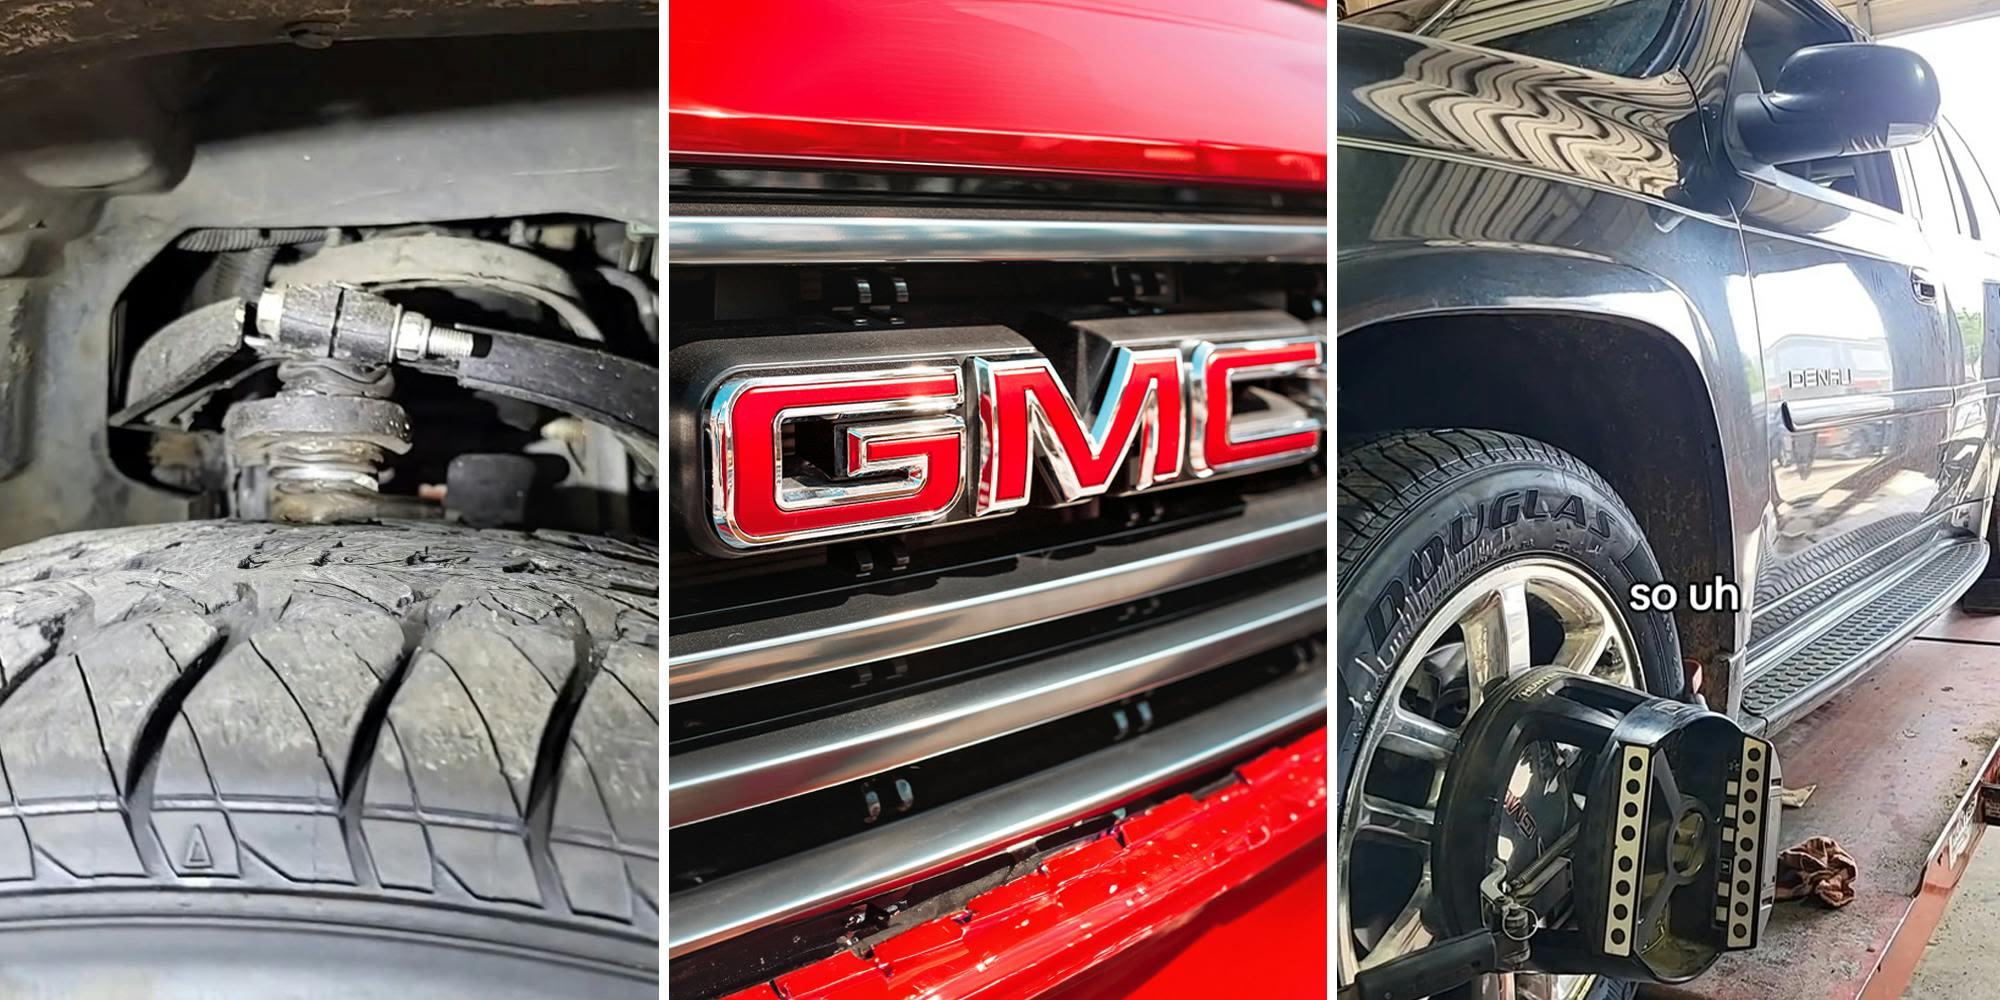 ‘It was just an honest mistake’: Woman told by 2 shops they can’t work on her GMC Denali. She’s been driving with backward parts